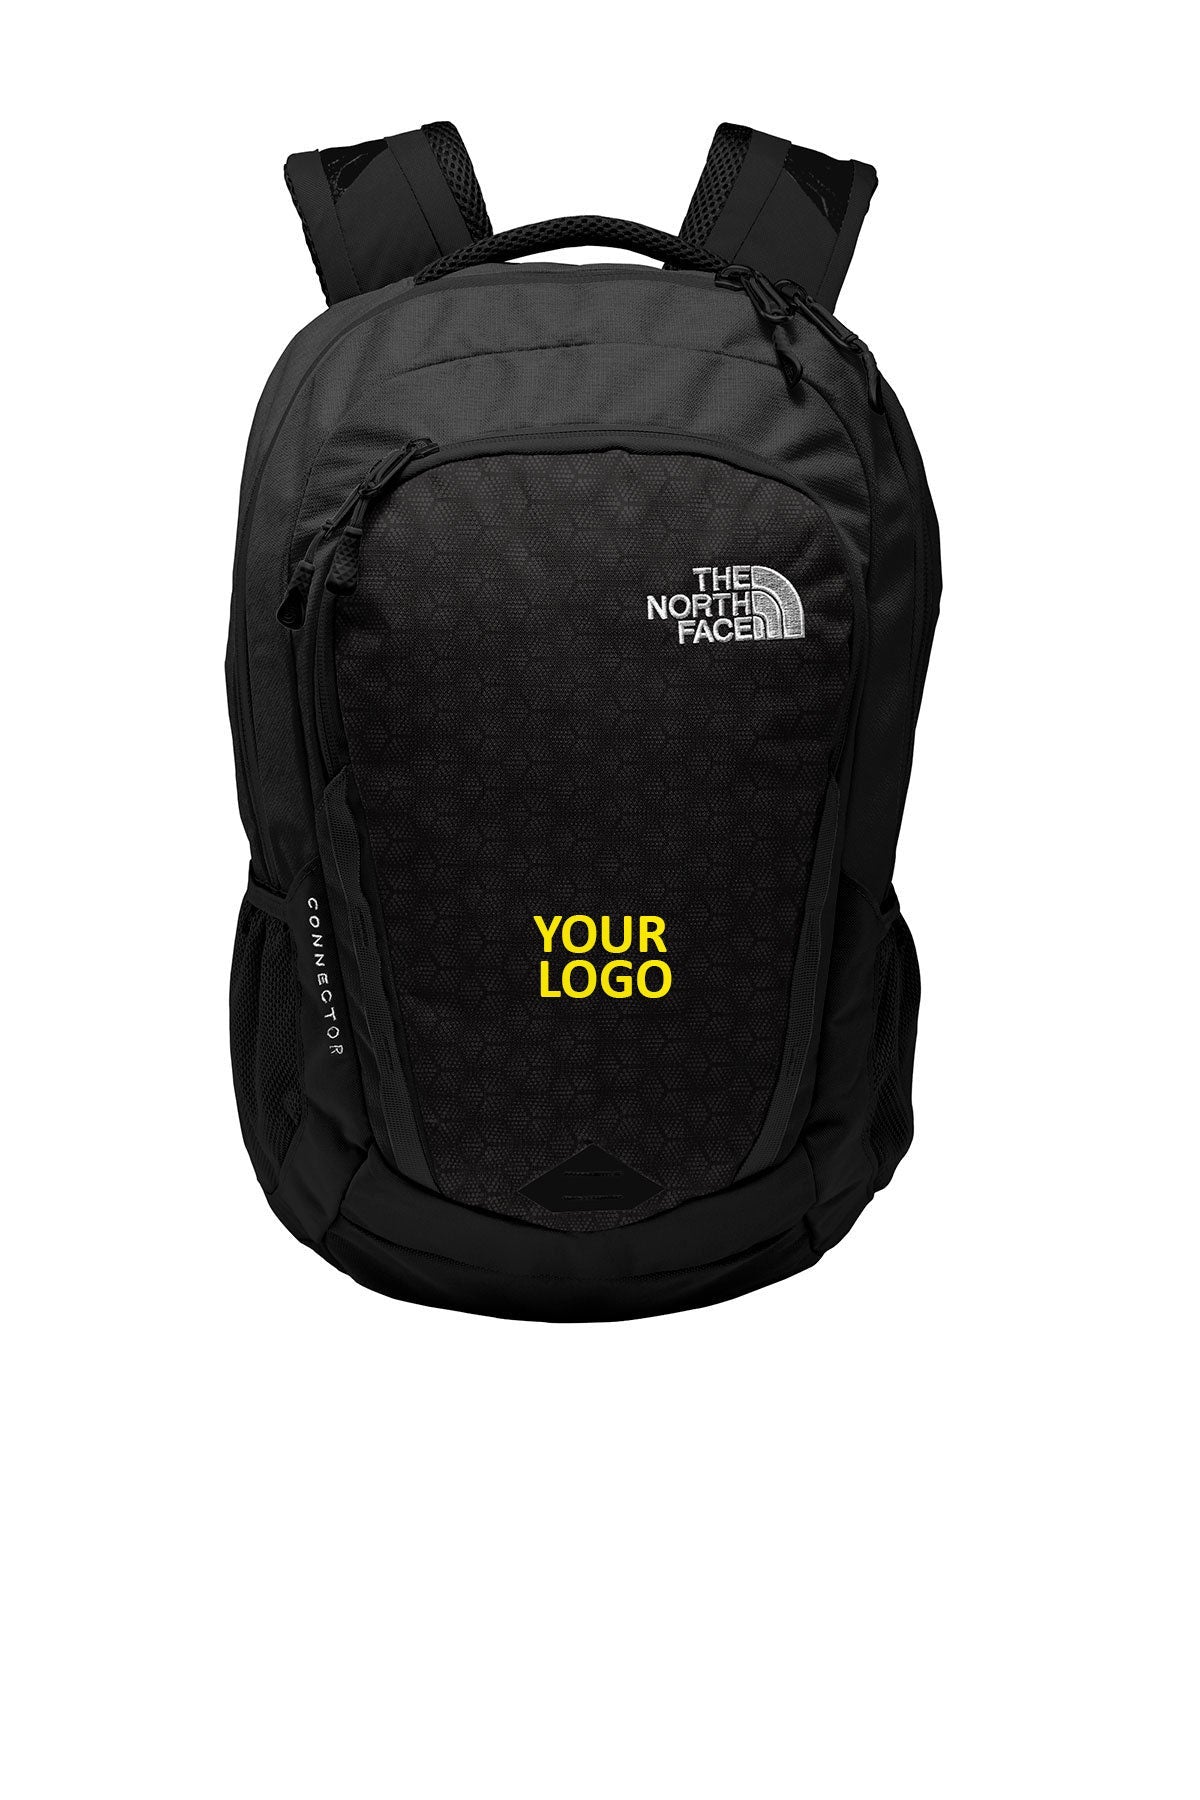 the north face connector backpack nf0a3kx8 tnf black tnf white